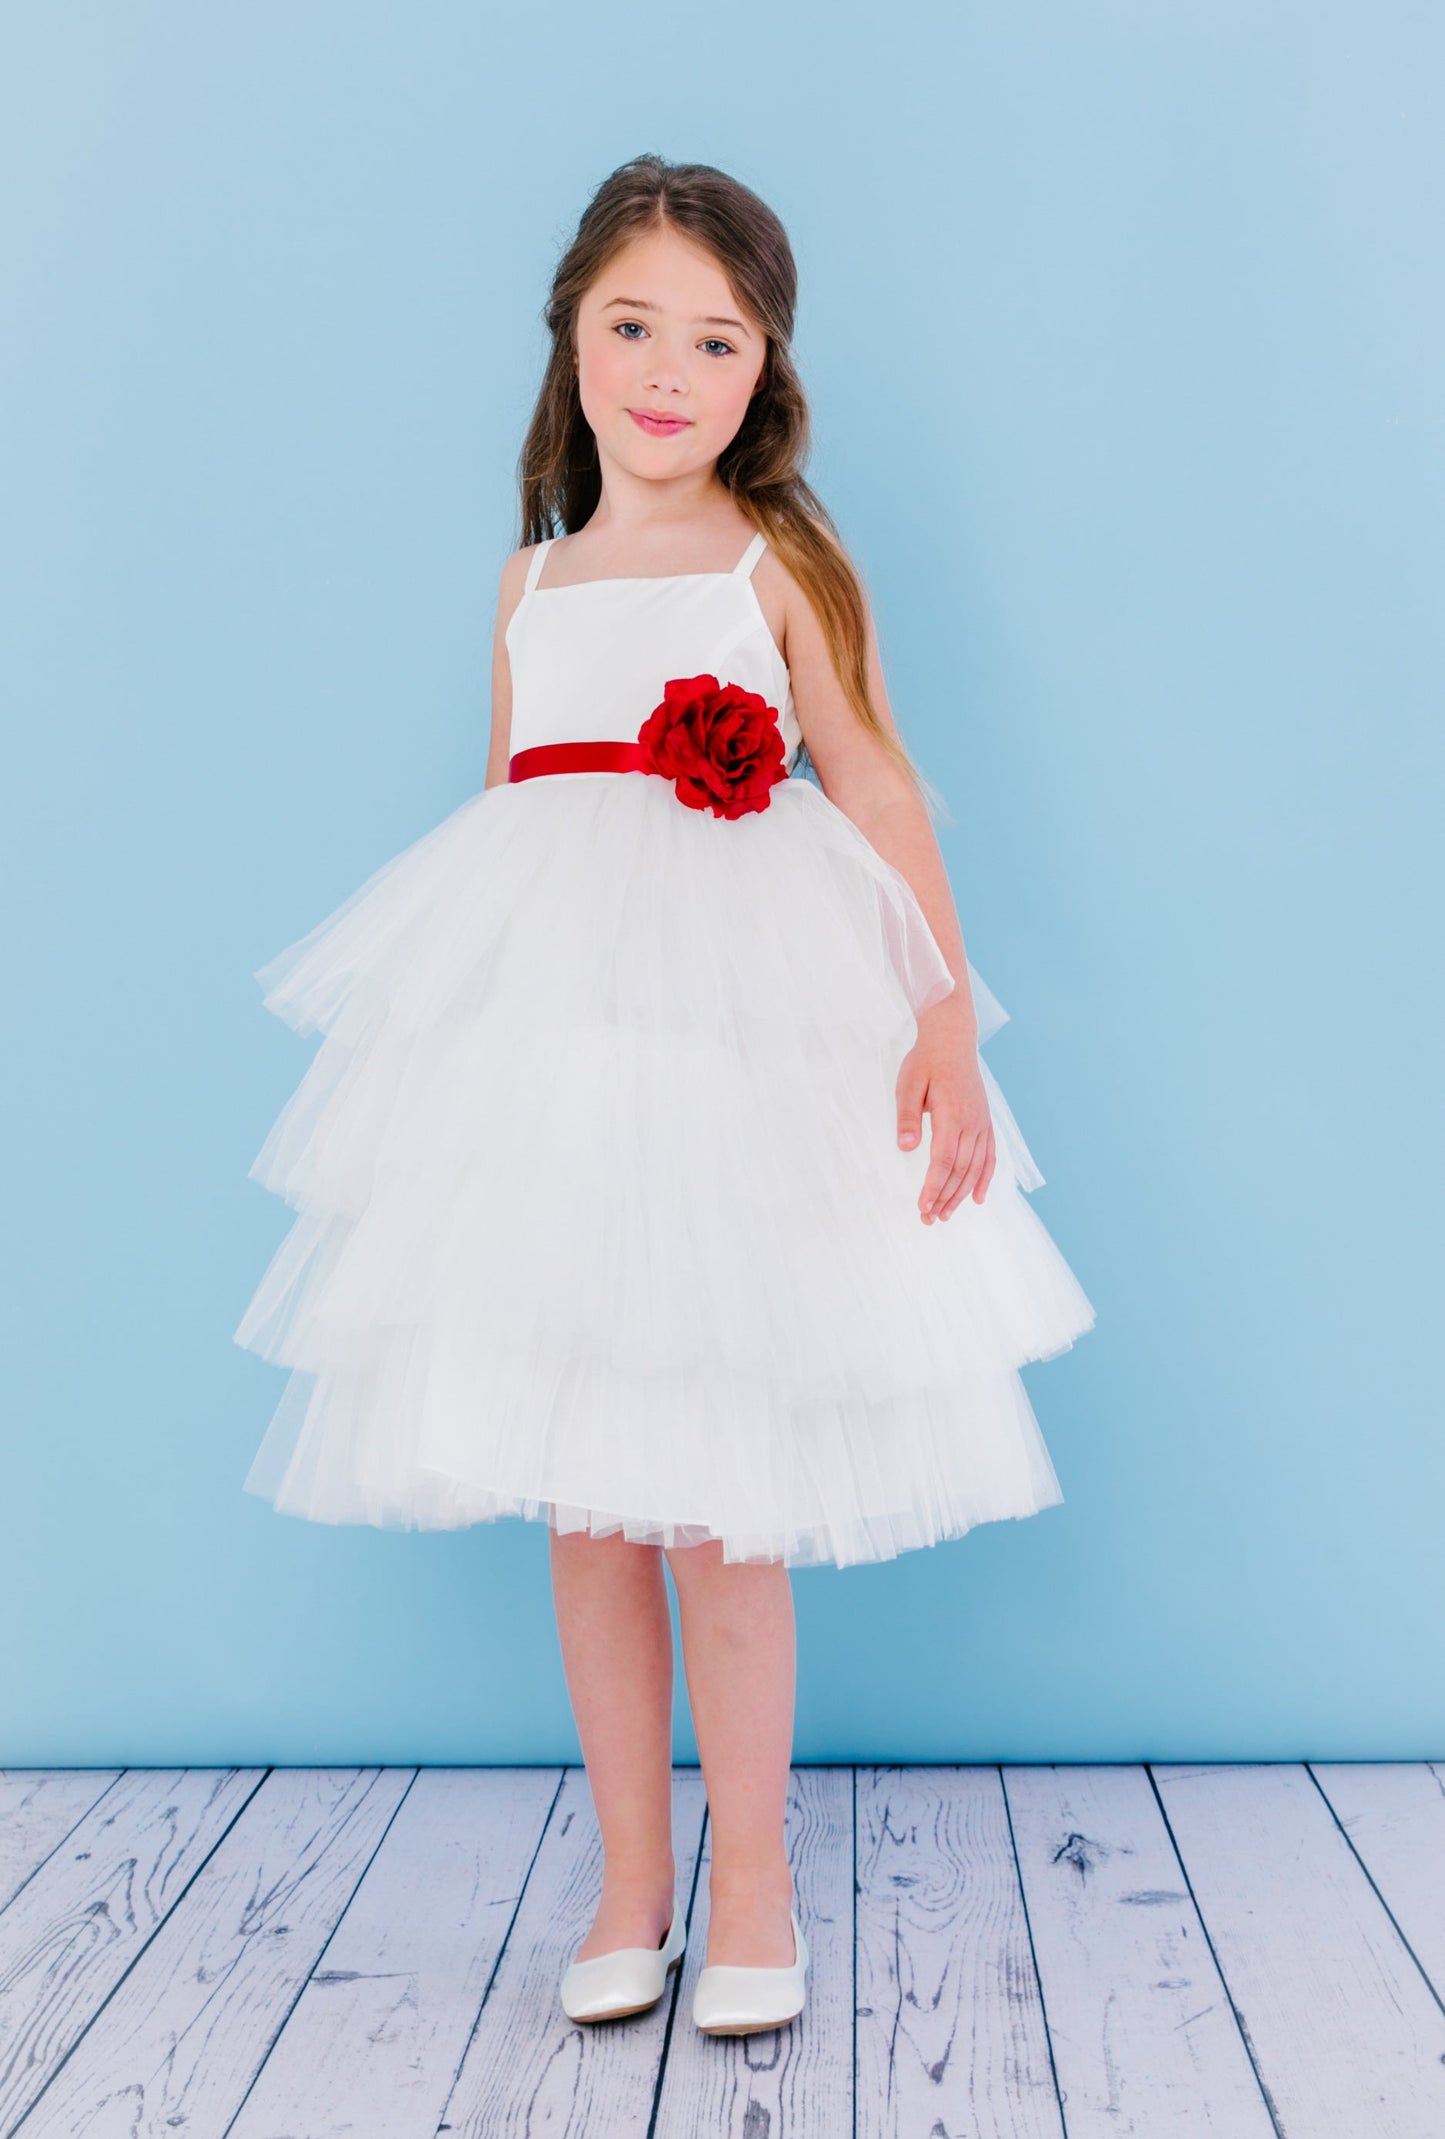 Rosebud Fashions Style 5117 is a spaghetti strap T-length dress. The bodice is satin with a 4 tiered tulle skirt that is accented with a ribbon that ties in the back with a flower. Satin buttons cover the zipper. Great flower girl dress & Formal Party Gown!  Available Sizes: 2,4,6,8,10,12  Available Colors: White, Ivory  Fabric is Satin and Tulle